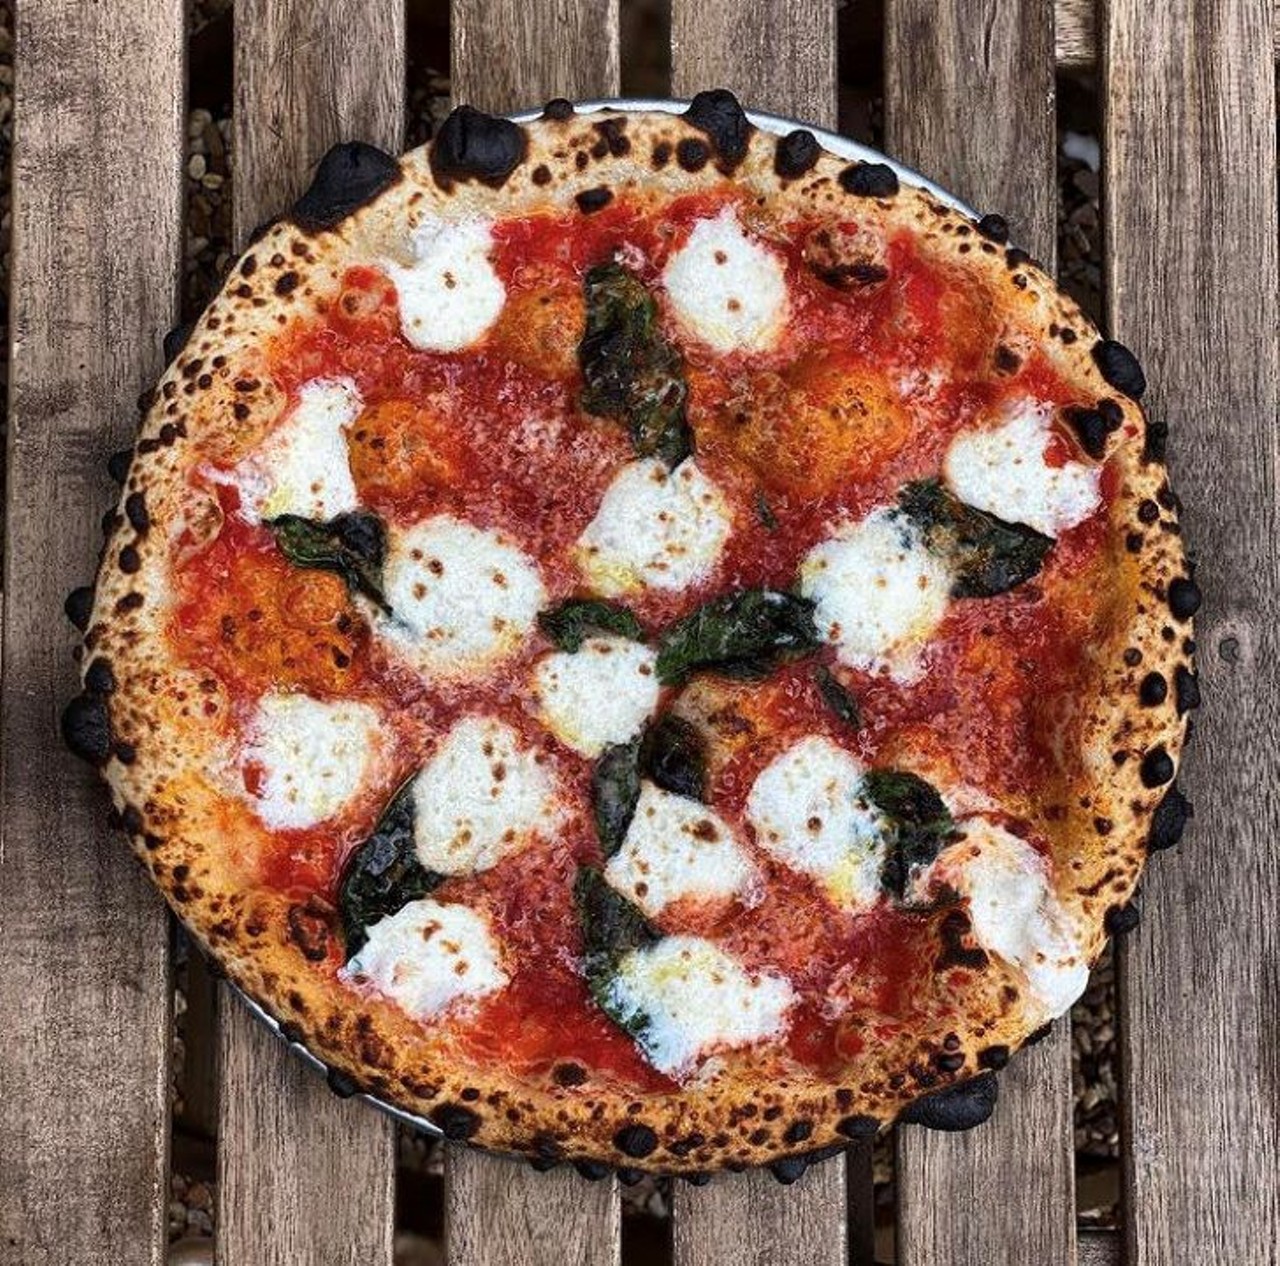 Pizza Bruno 
3990 Curry Ford Road
Cooked in a wood-fired oven for 90 seconds at 1,000 degrees, Pizza Bruno&#146;s notorious char-spotted pizza represents true Neapolitan-style pizza.  
Photo via Pizza Bruno/Instagram